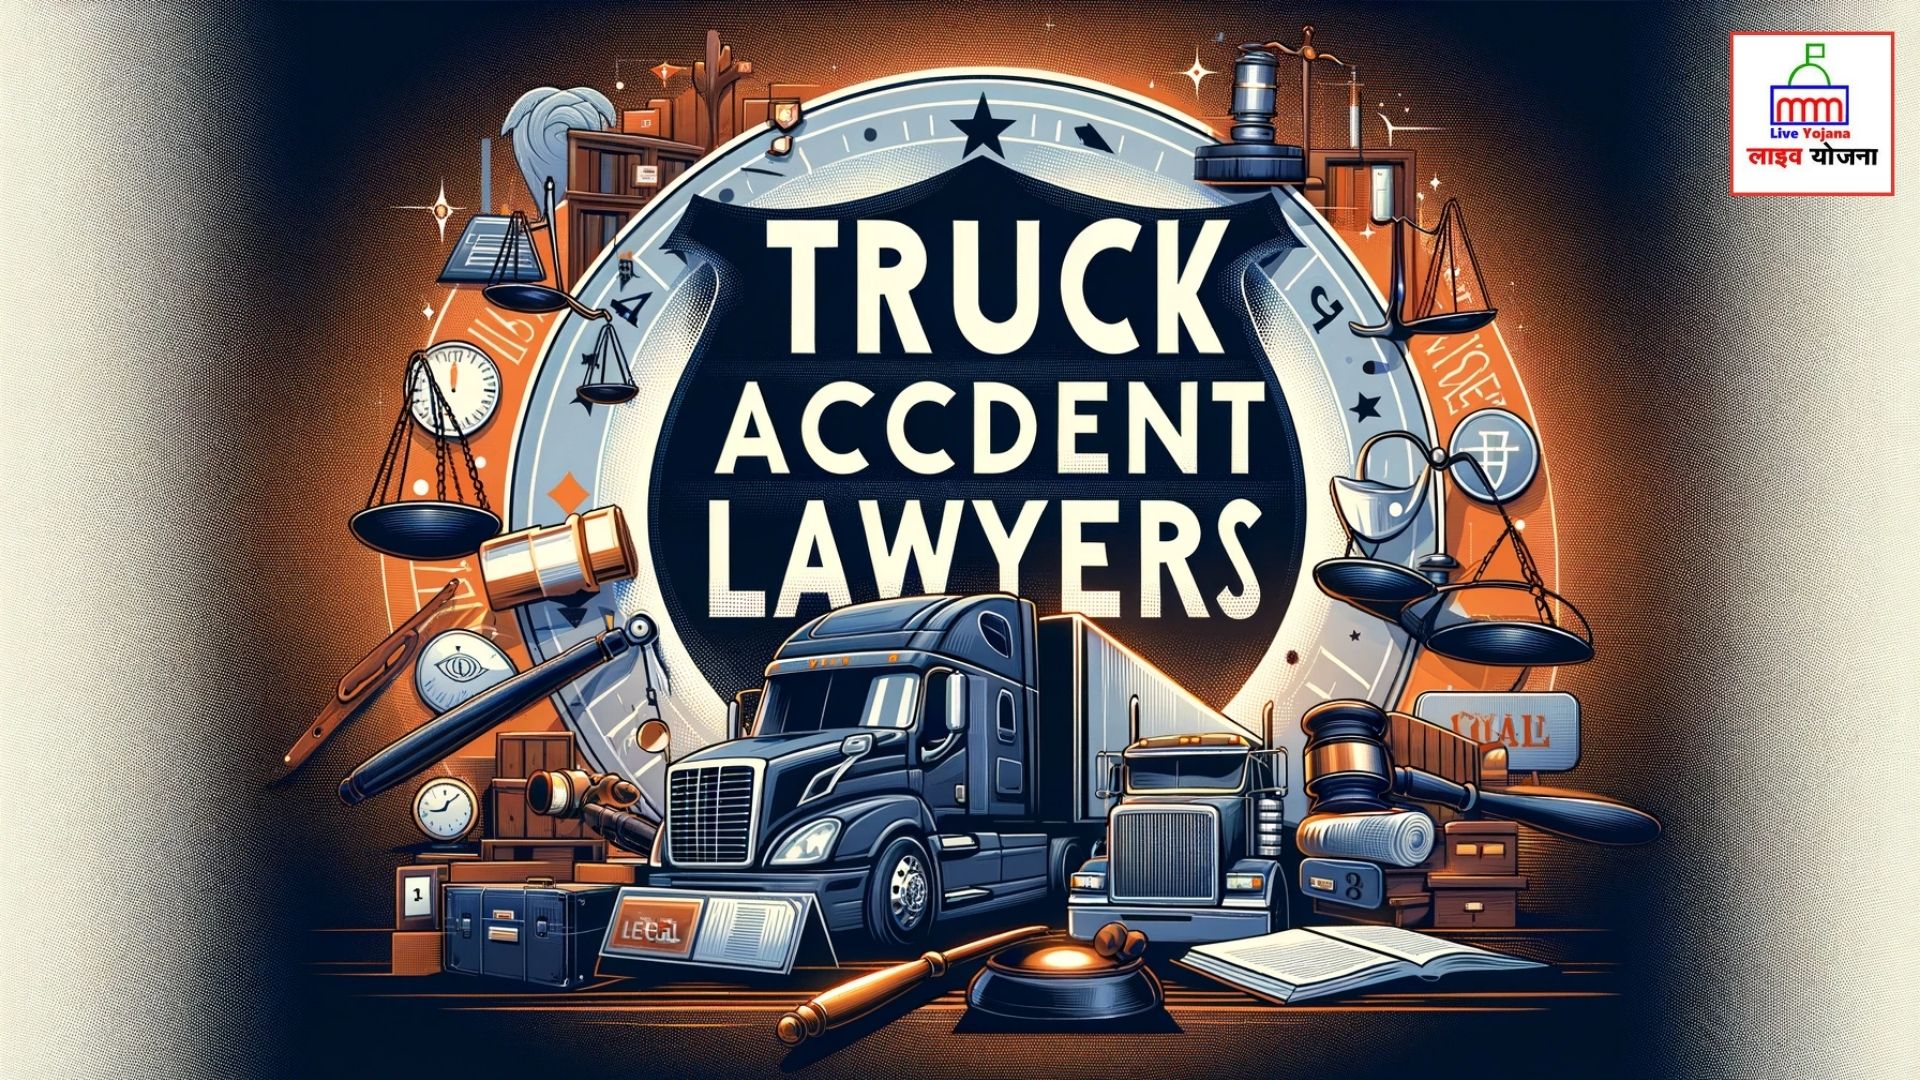 Truck Accident Lawyers 18 wheeler wreck lawyers 18 wheeler accident attorneys 18 wheeler wreck attorney 18 wheeler wreck lawyer